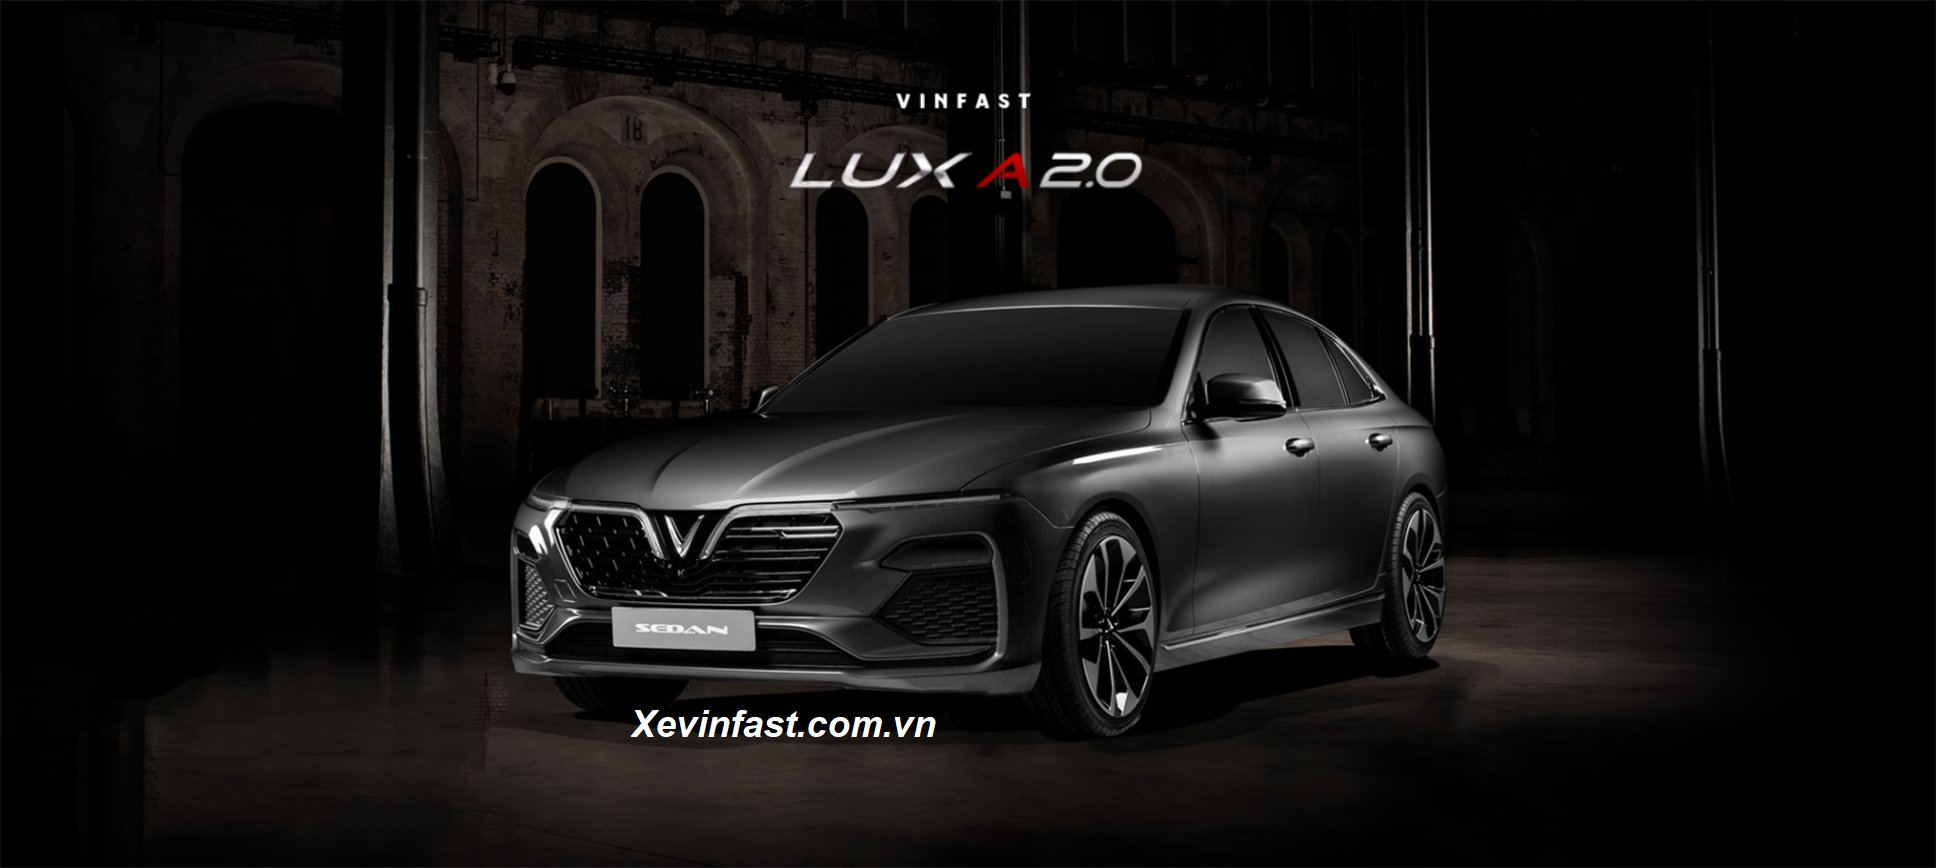 thiết kế vinfast lux a2.0